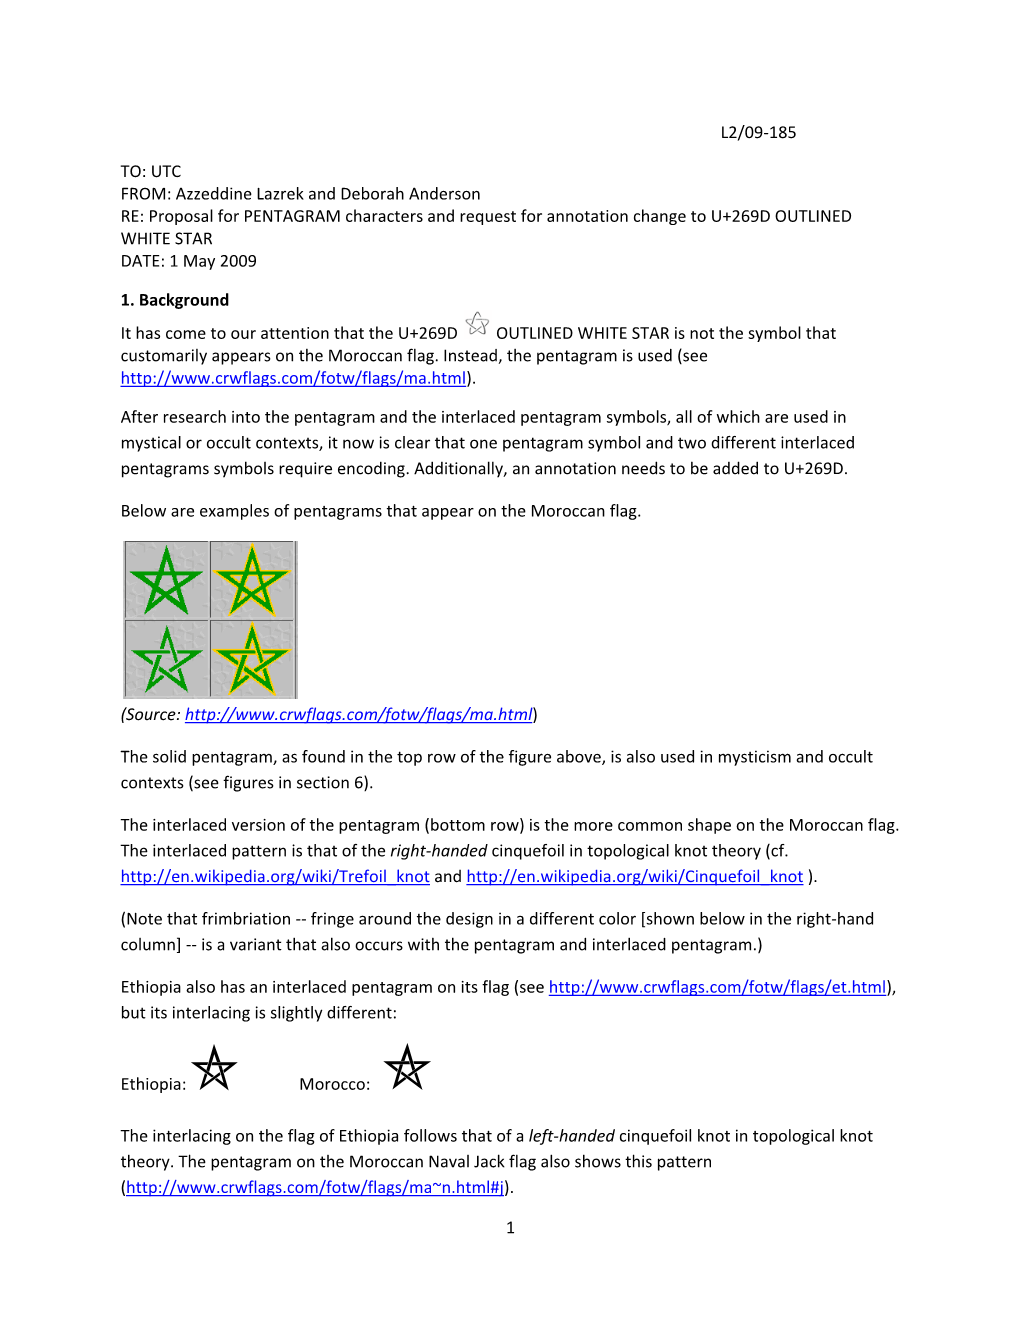 Proposal for PENTAGRAM Characters and Request for Annotation Change to U+269D OUTLINED WHITE STAR DATE: 1 May 2009